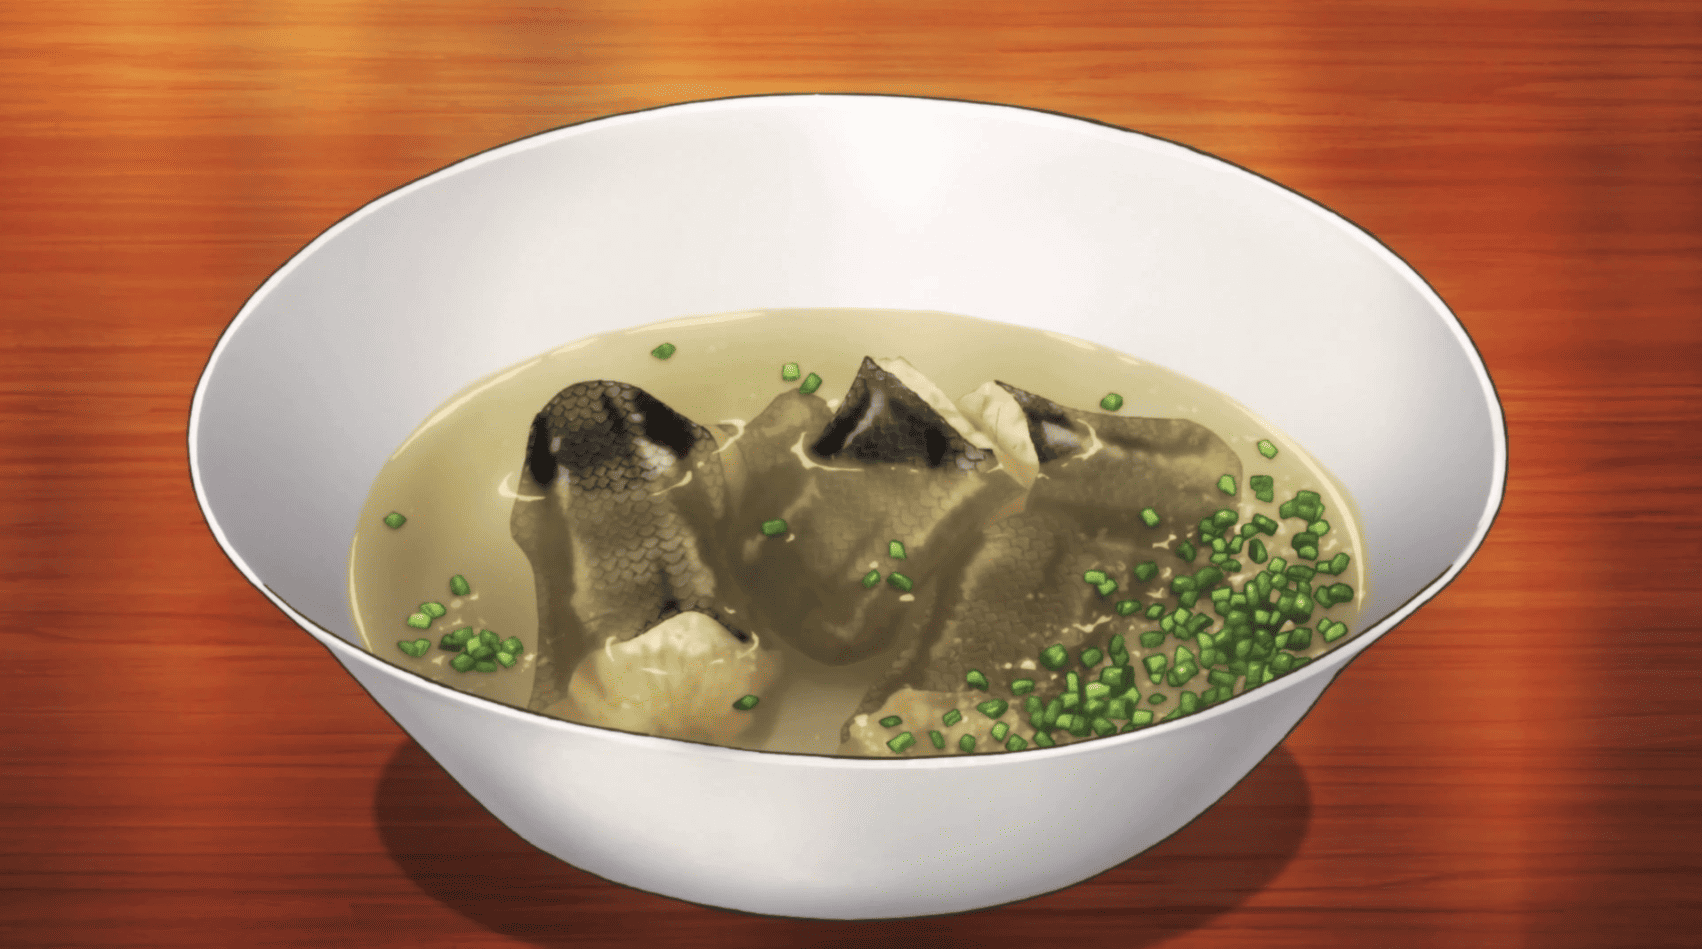 A bowl of boiled snake meat in a broth with green onions in this image from J.C. Staff